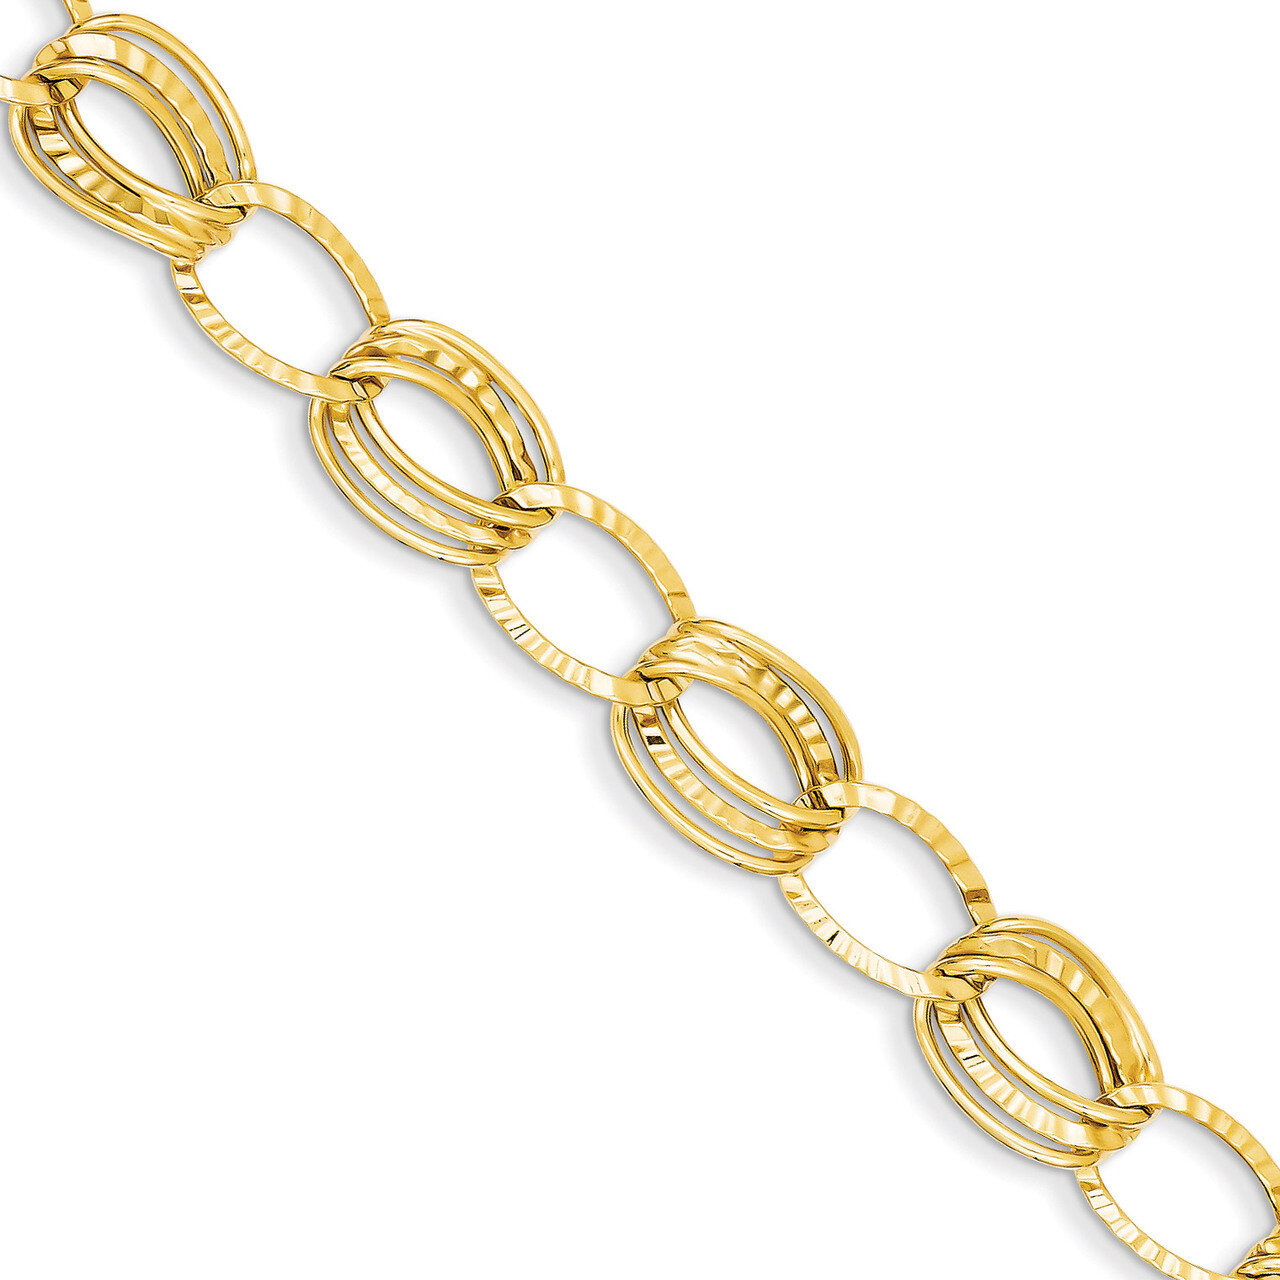 Hollow with Extension Bracelet 7.5 Inch 14k Gold Polished and Textured SF1926-7.5